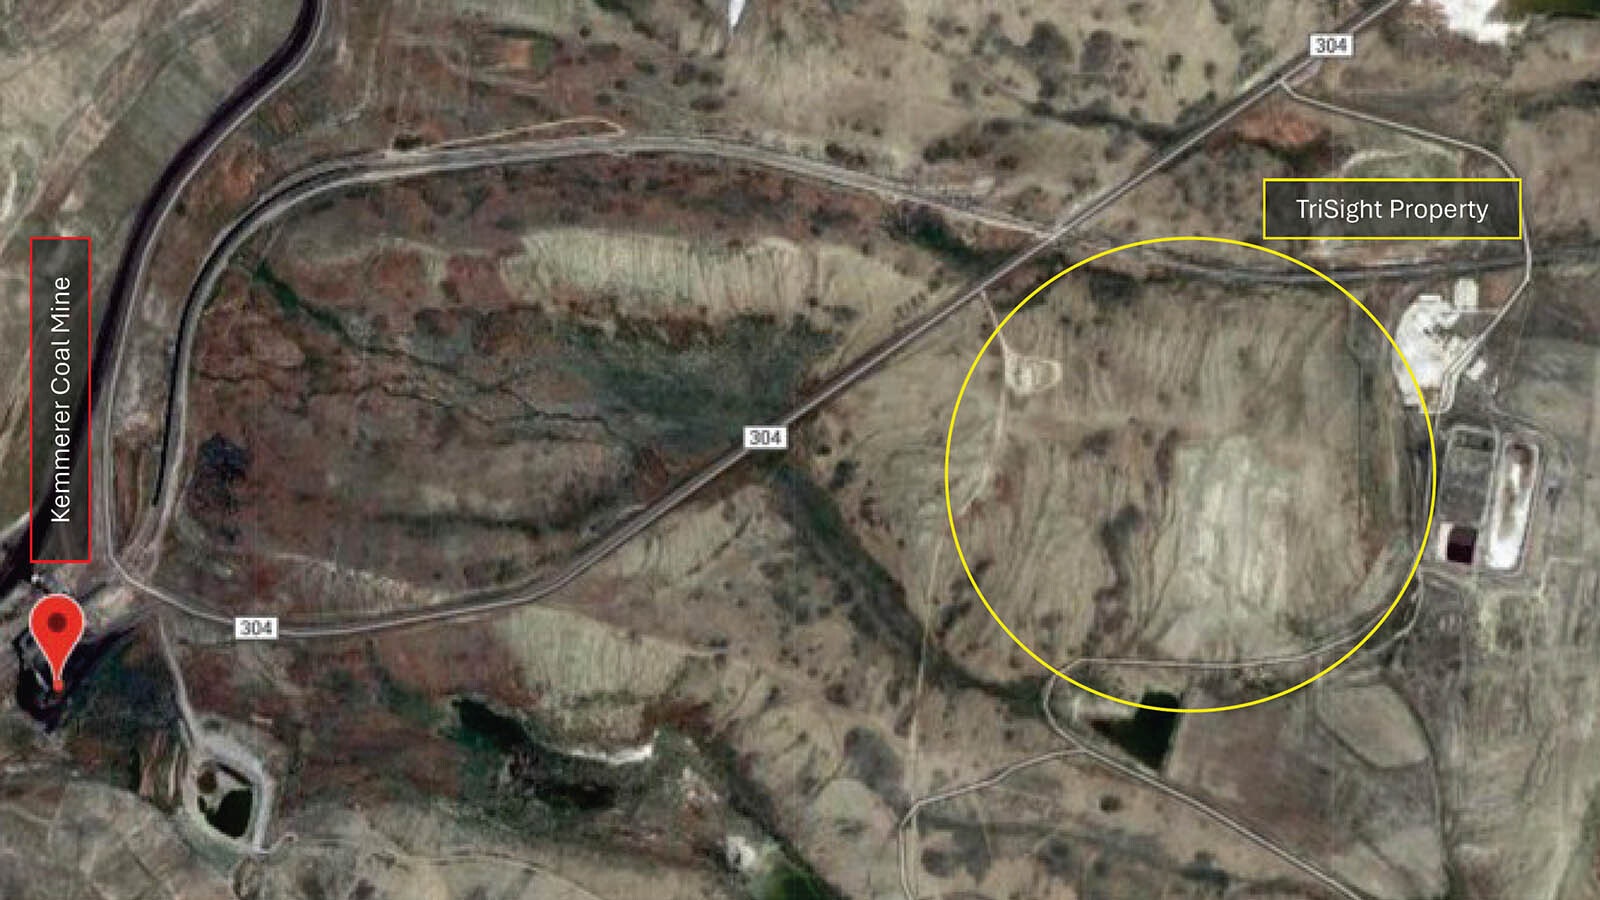 TriSight has purchased 136 acres from Lincoln County where it plans to build a carbon advanced center to manufacture a skincare line and other products that tap nutrients from coal. The center would be located in Kemmerer, near the coal mine along U.S. Highway 189.